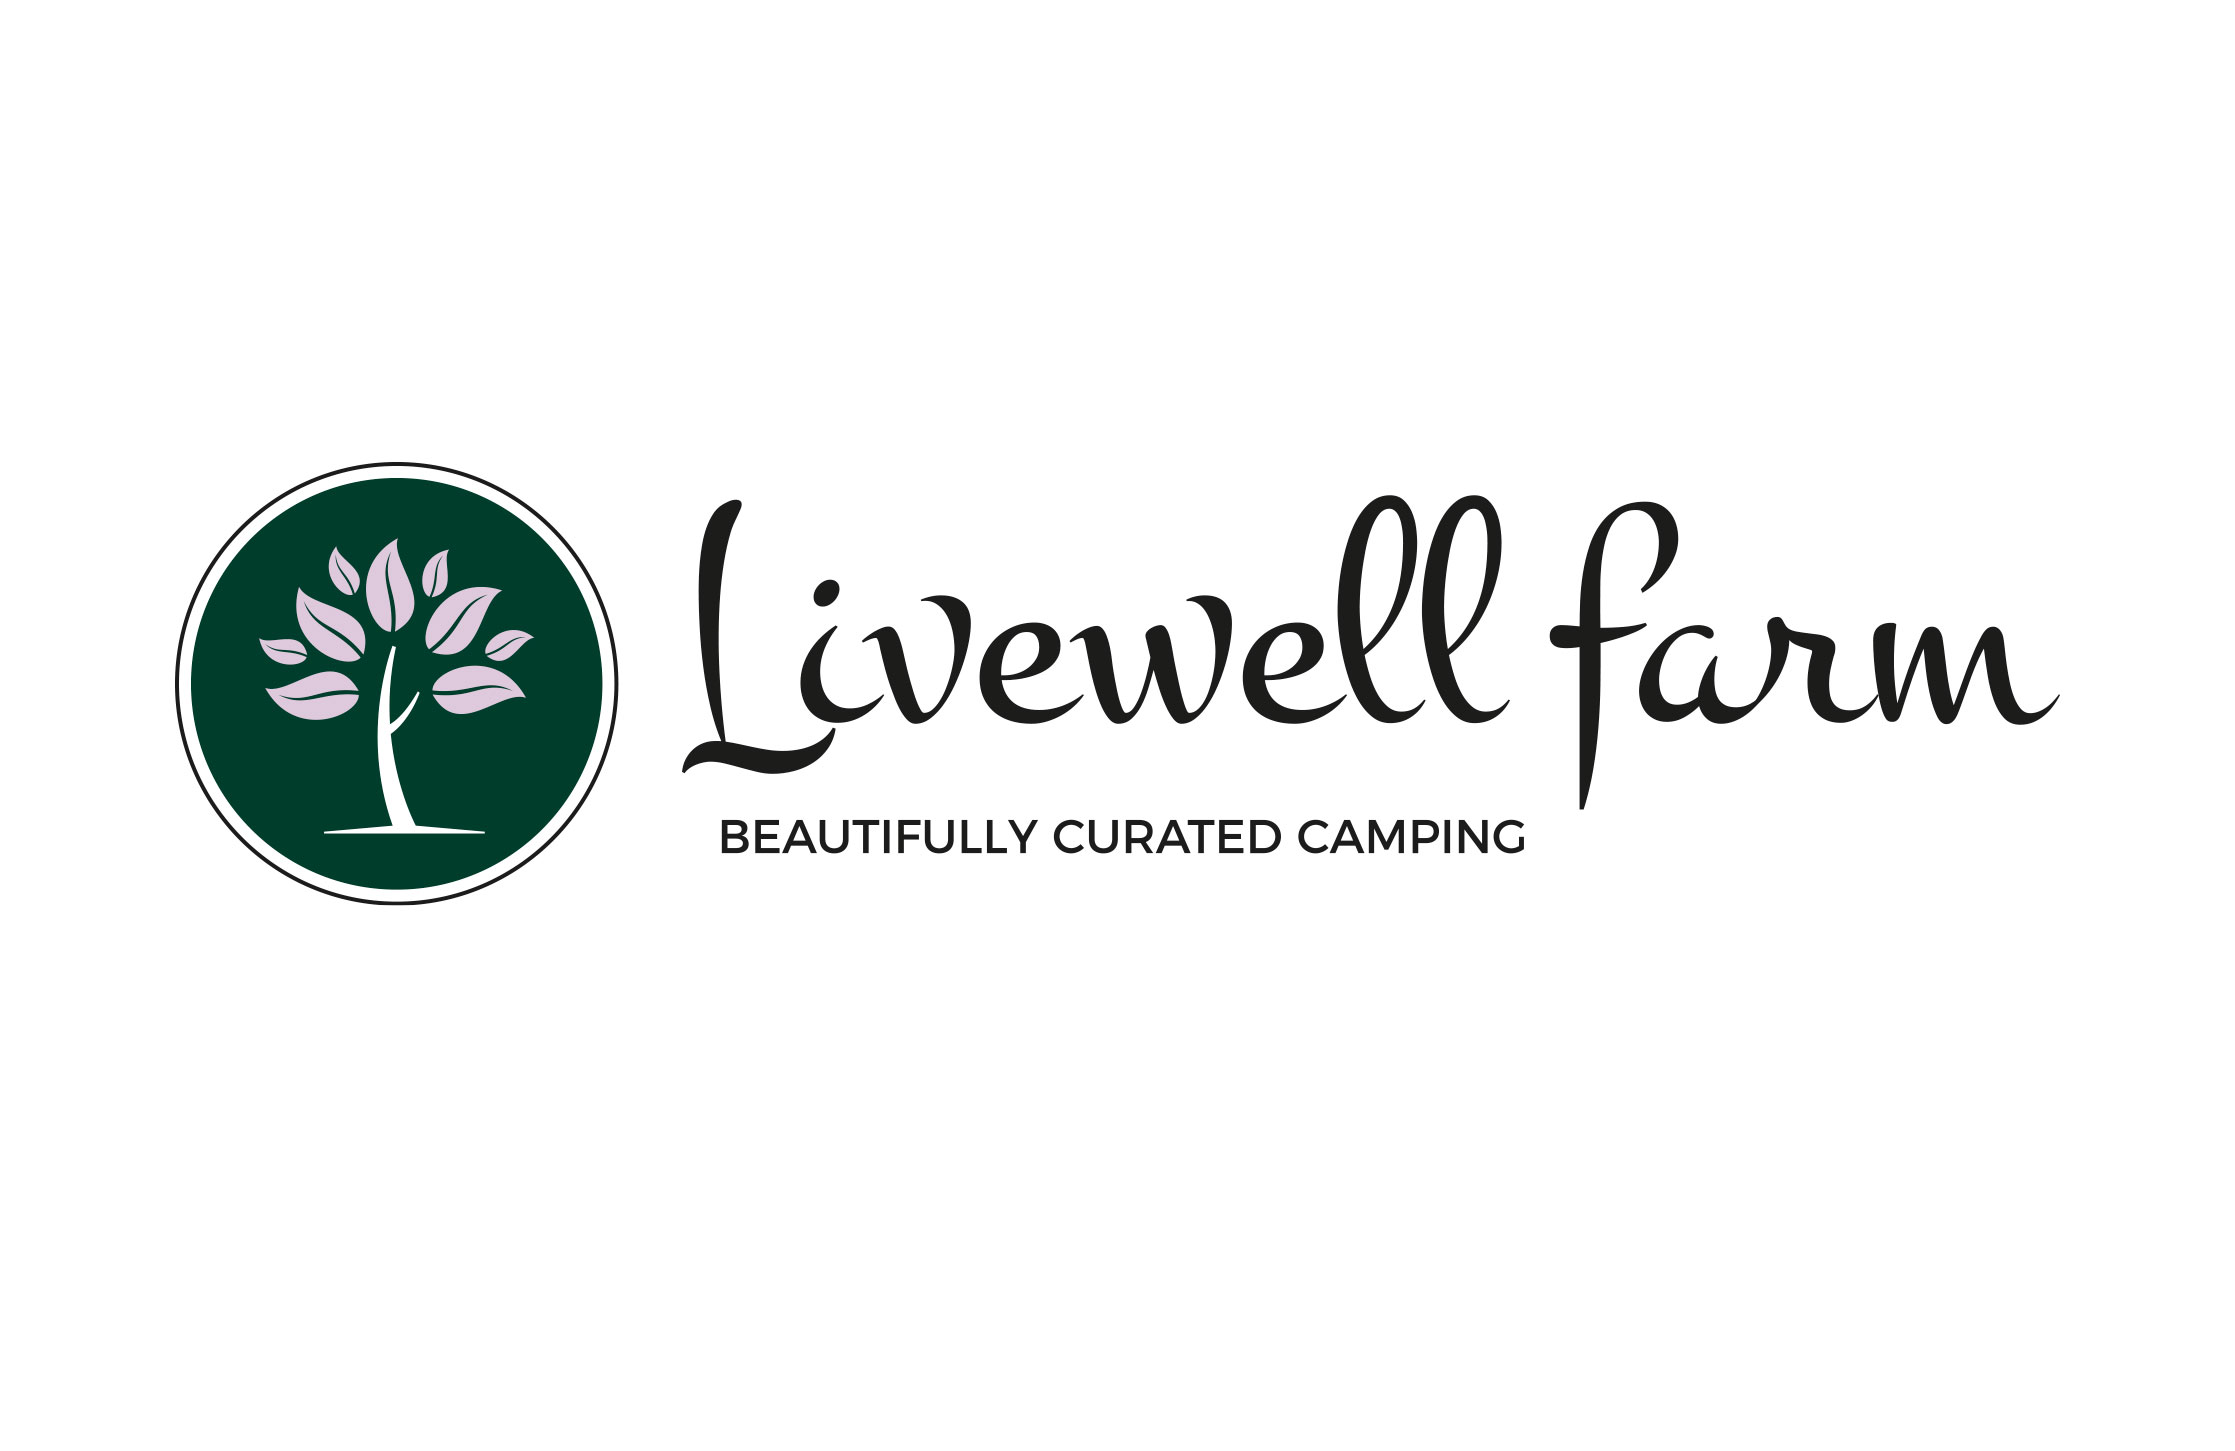 Design and artwork of a logo for Livewell Farm to be used for all applications